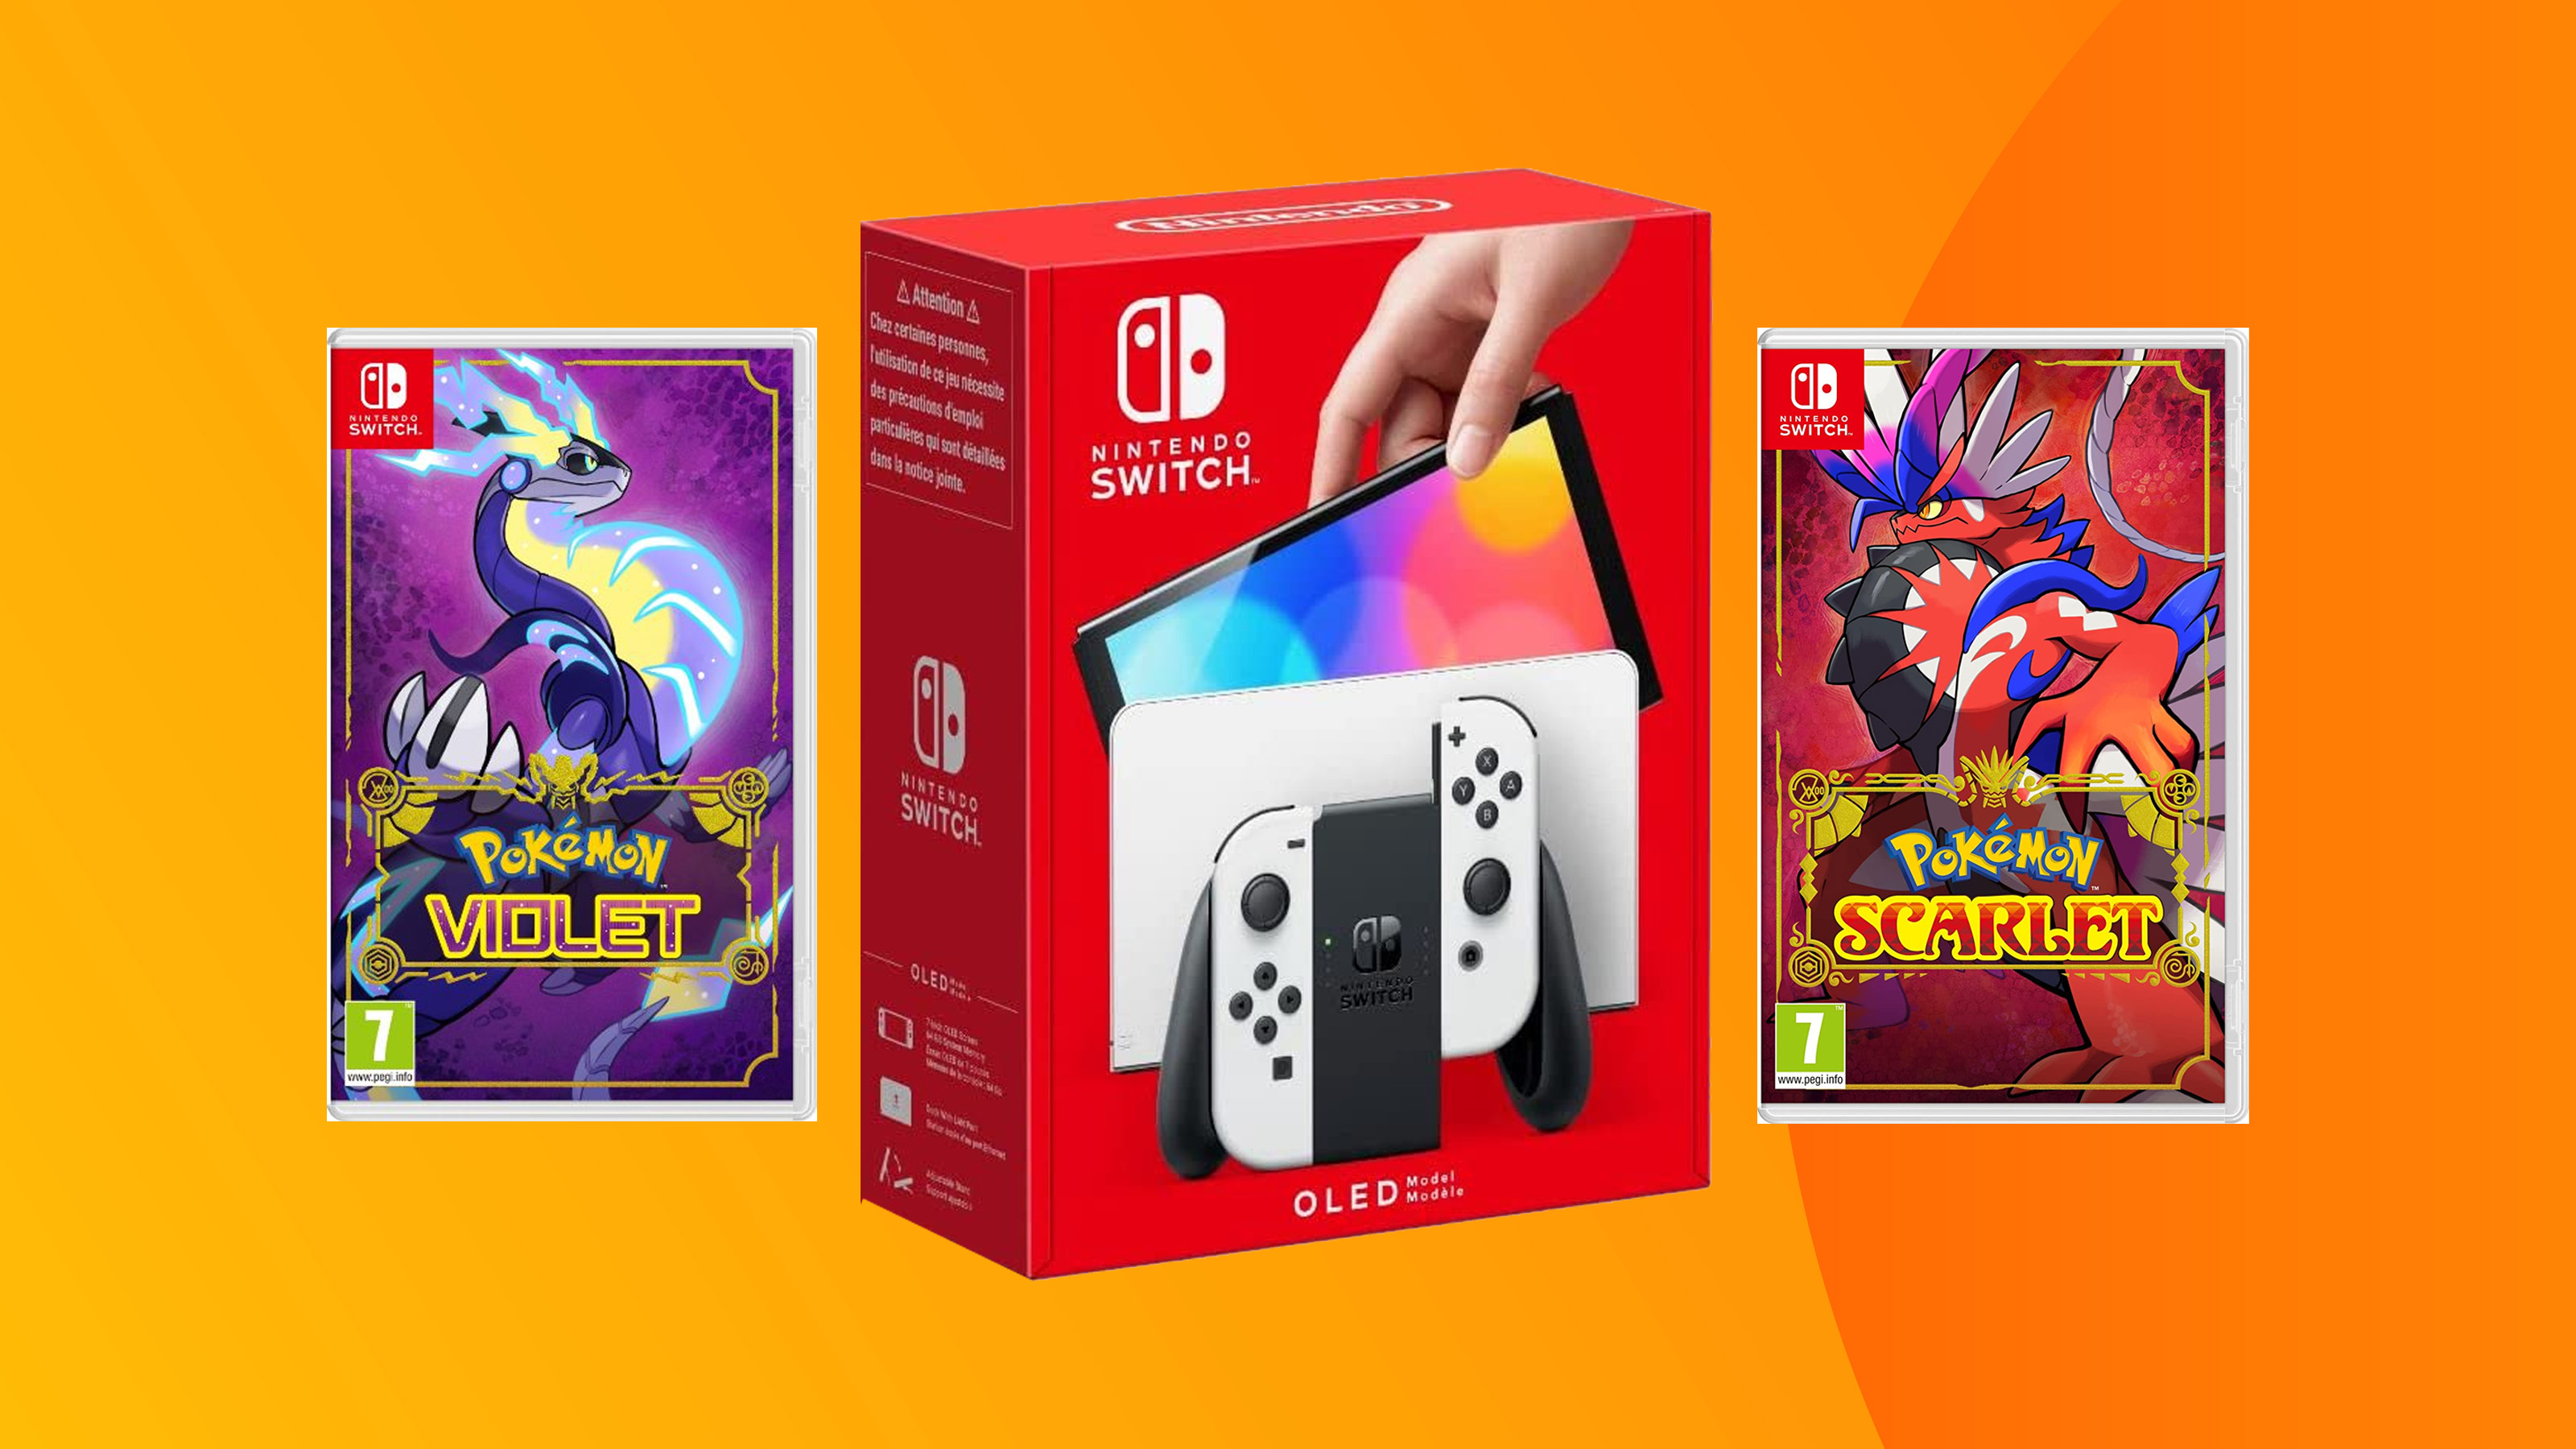 A crop shot of the Switch OLED console and Pokemon games on a colored background